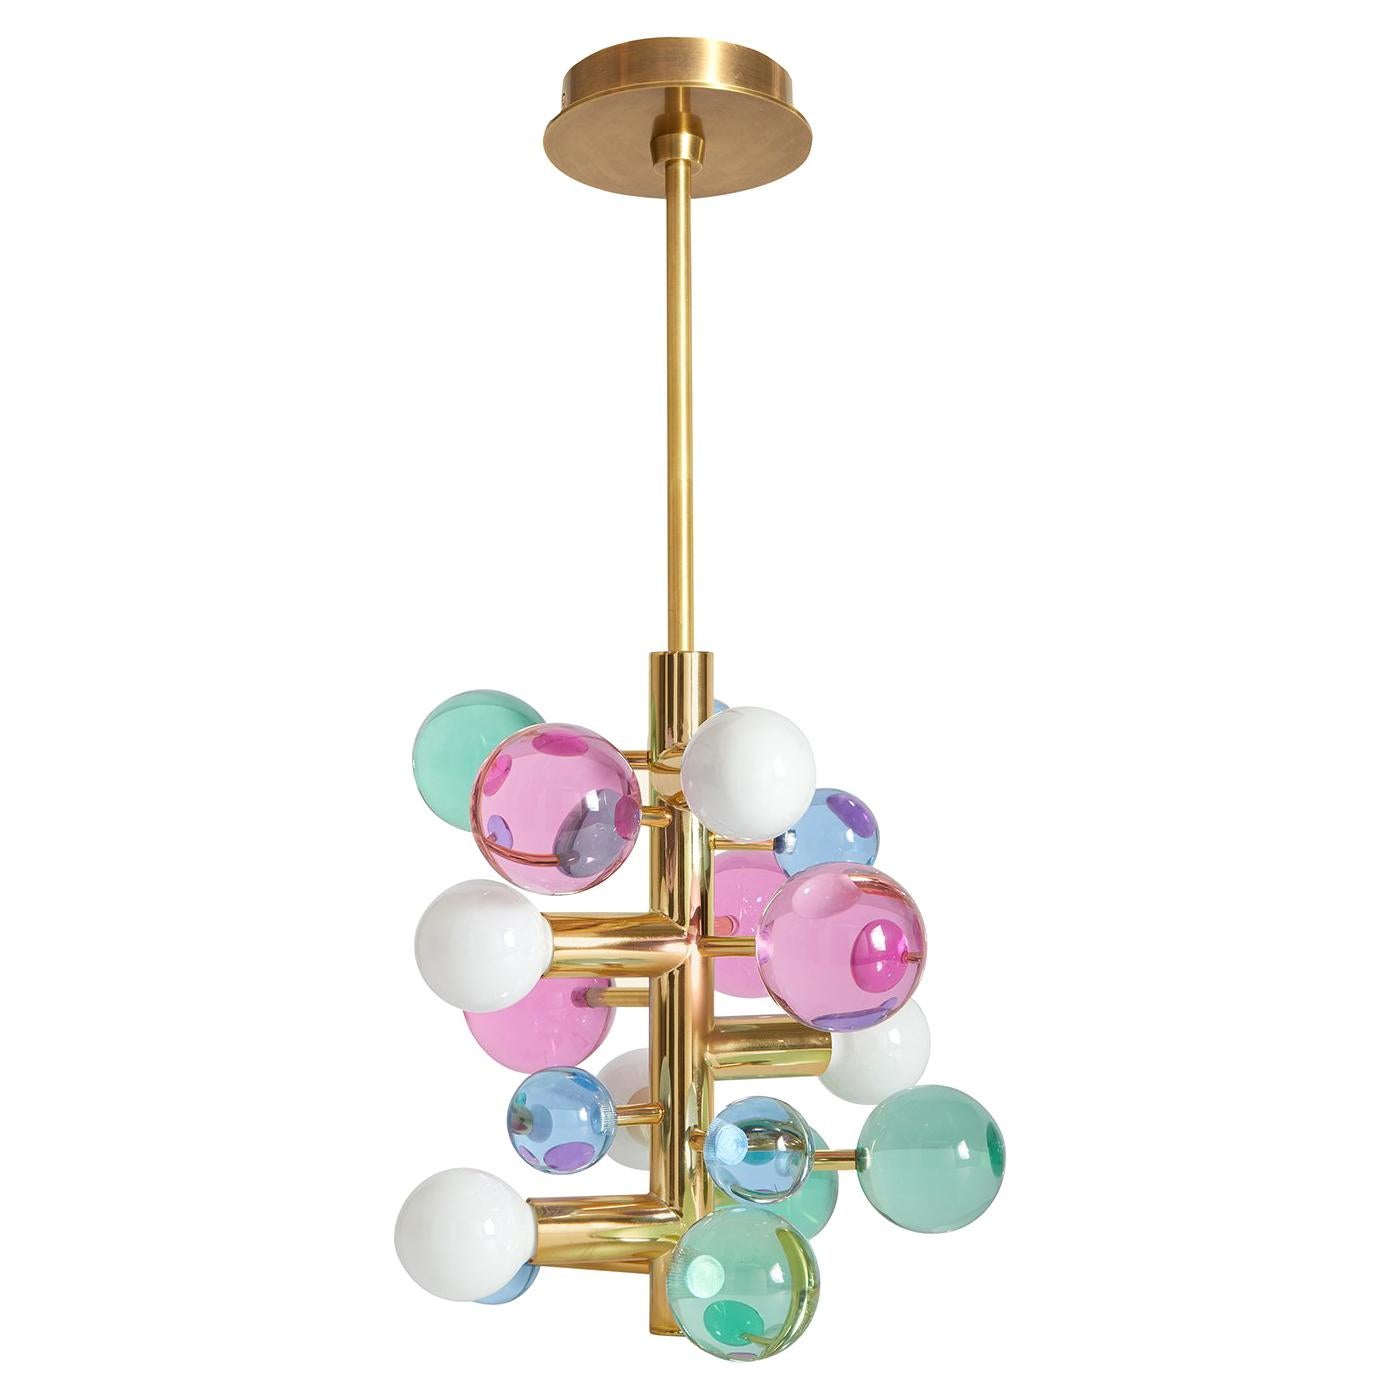 Globo Colored Lucite and Brass Five-Light Chandelier